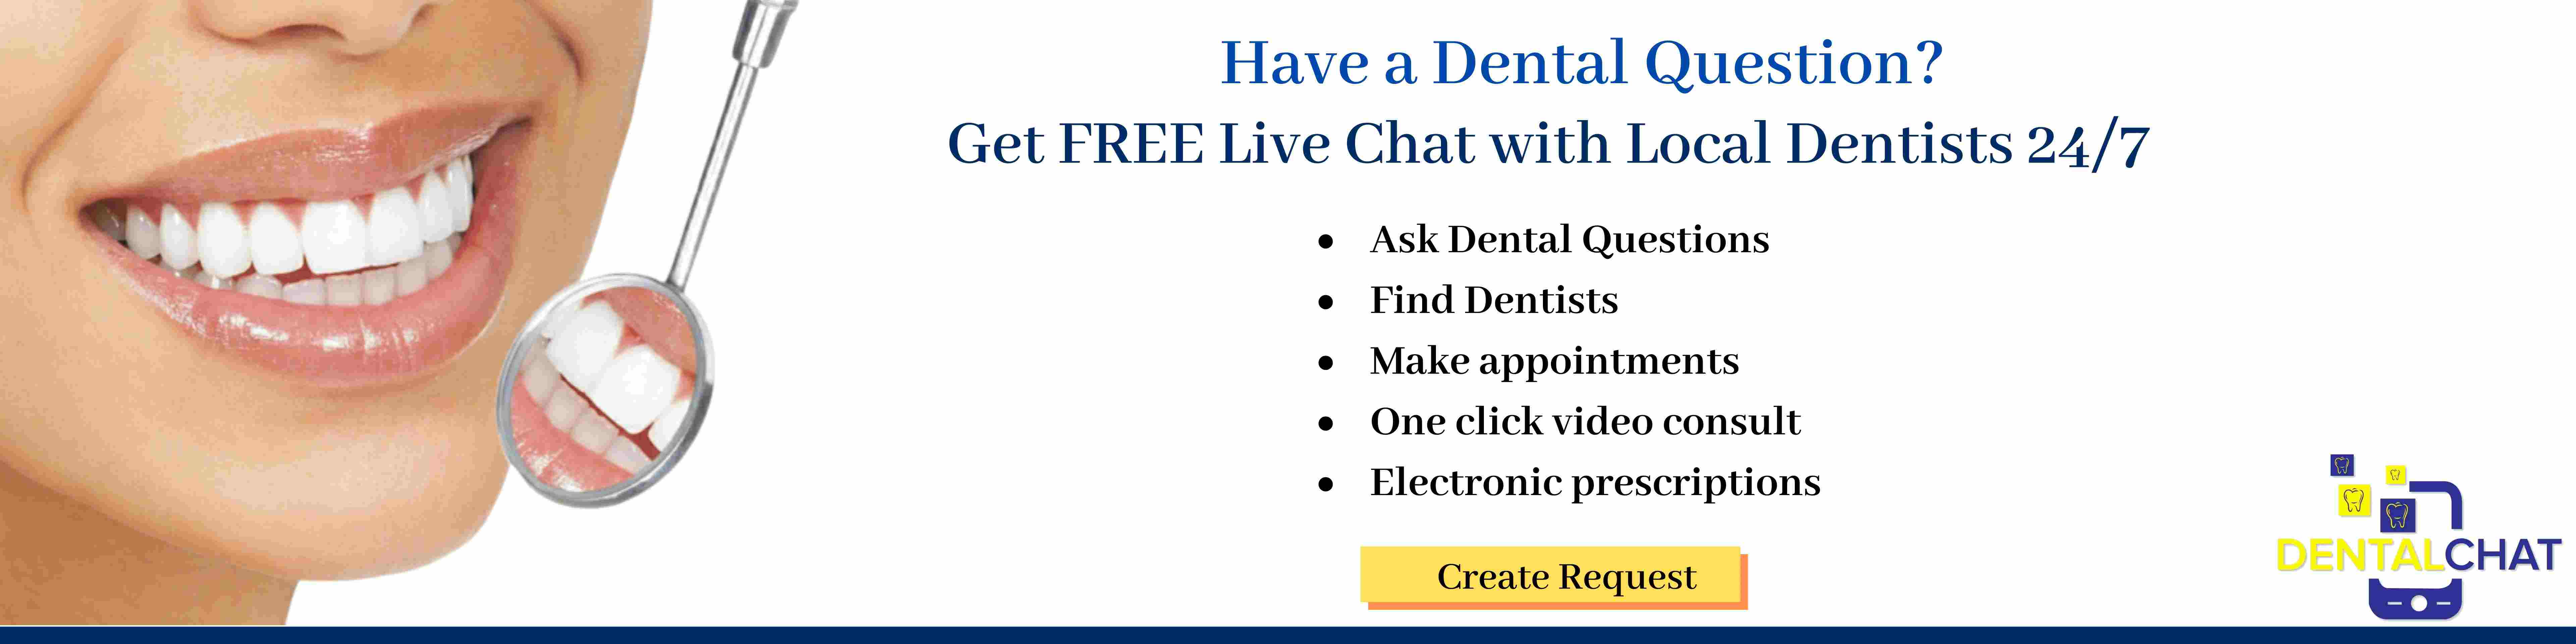 Organic Dentistry Chat, Local Organic Holistic Dentist Chatting, Holistic Dentistry Blog, Organic Dental Care Discussion